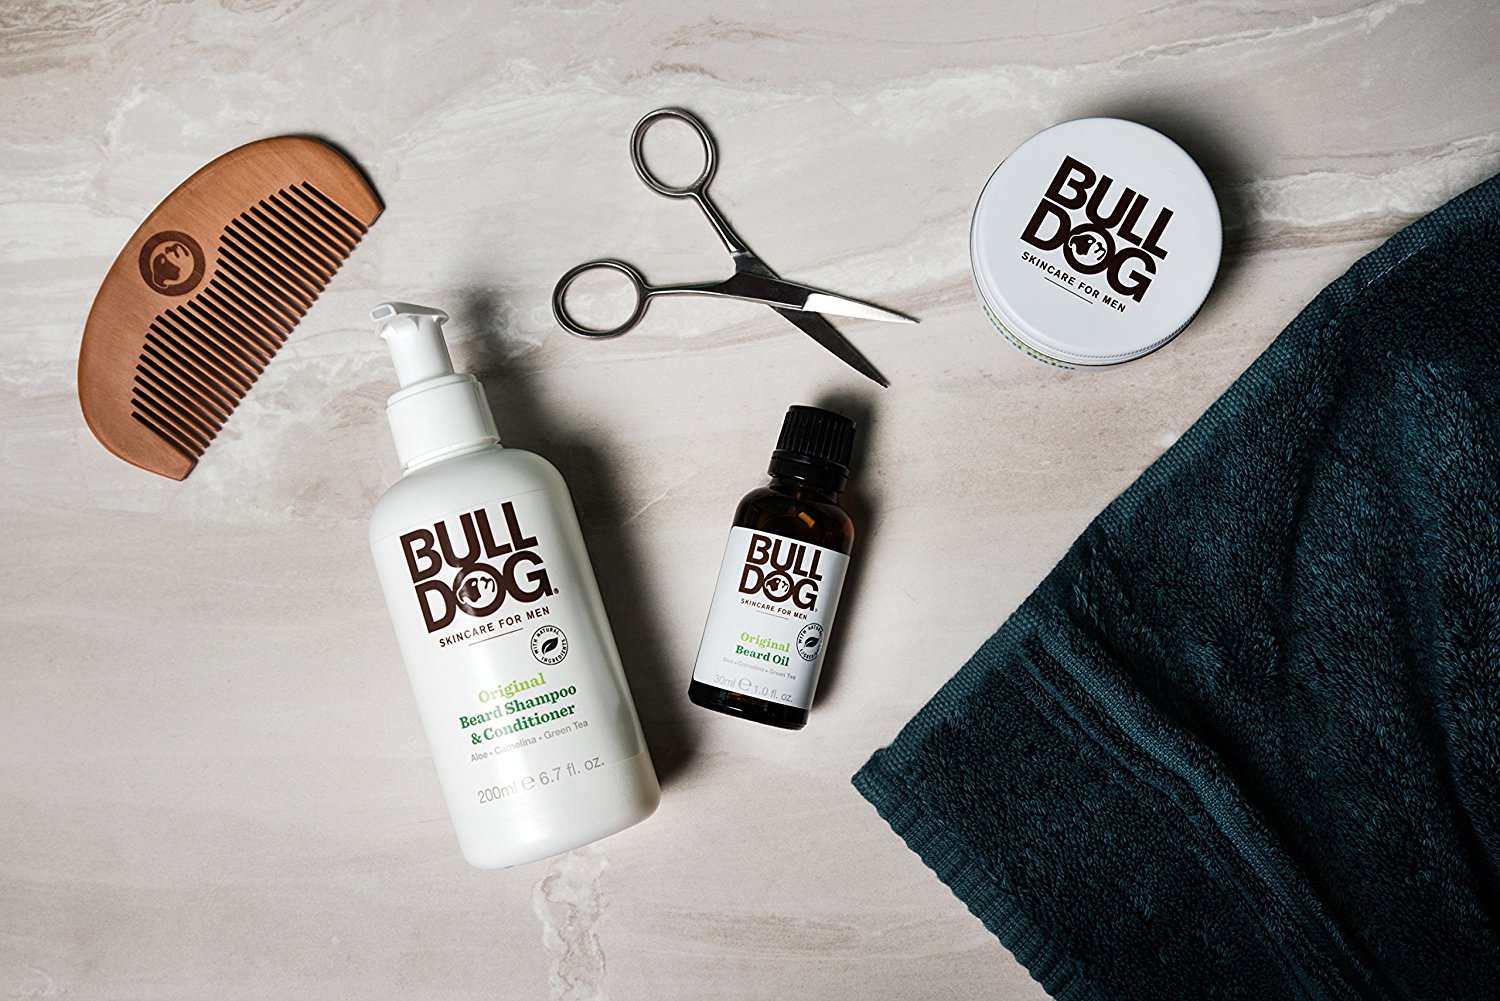 Bulldog Beard Oil And Balm Will Keep Your Face From